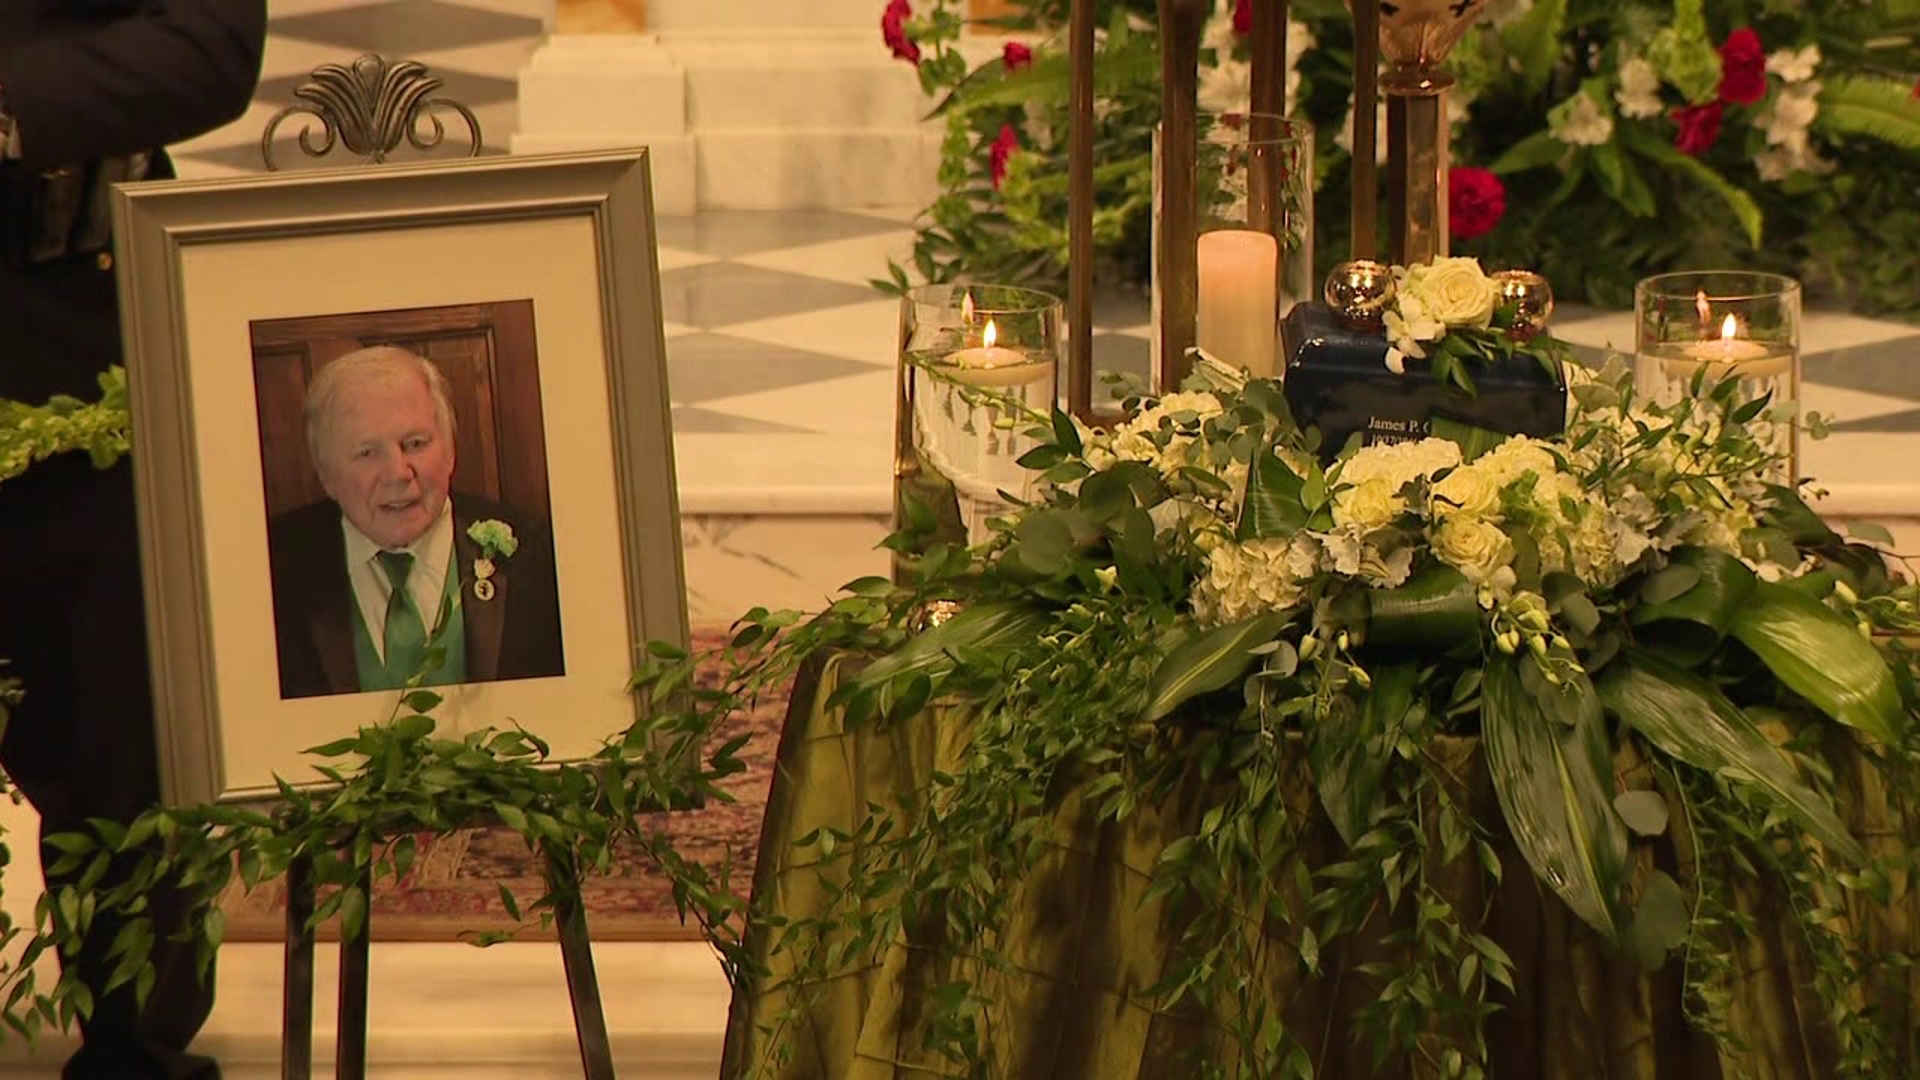 Hundreds gathered at St. Peter's Cathedral in downtown Scranton to honor the former mayor.